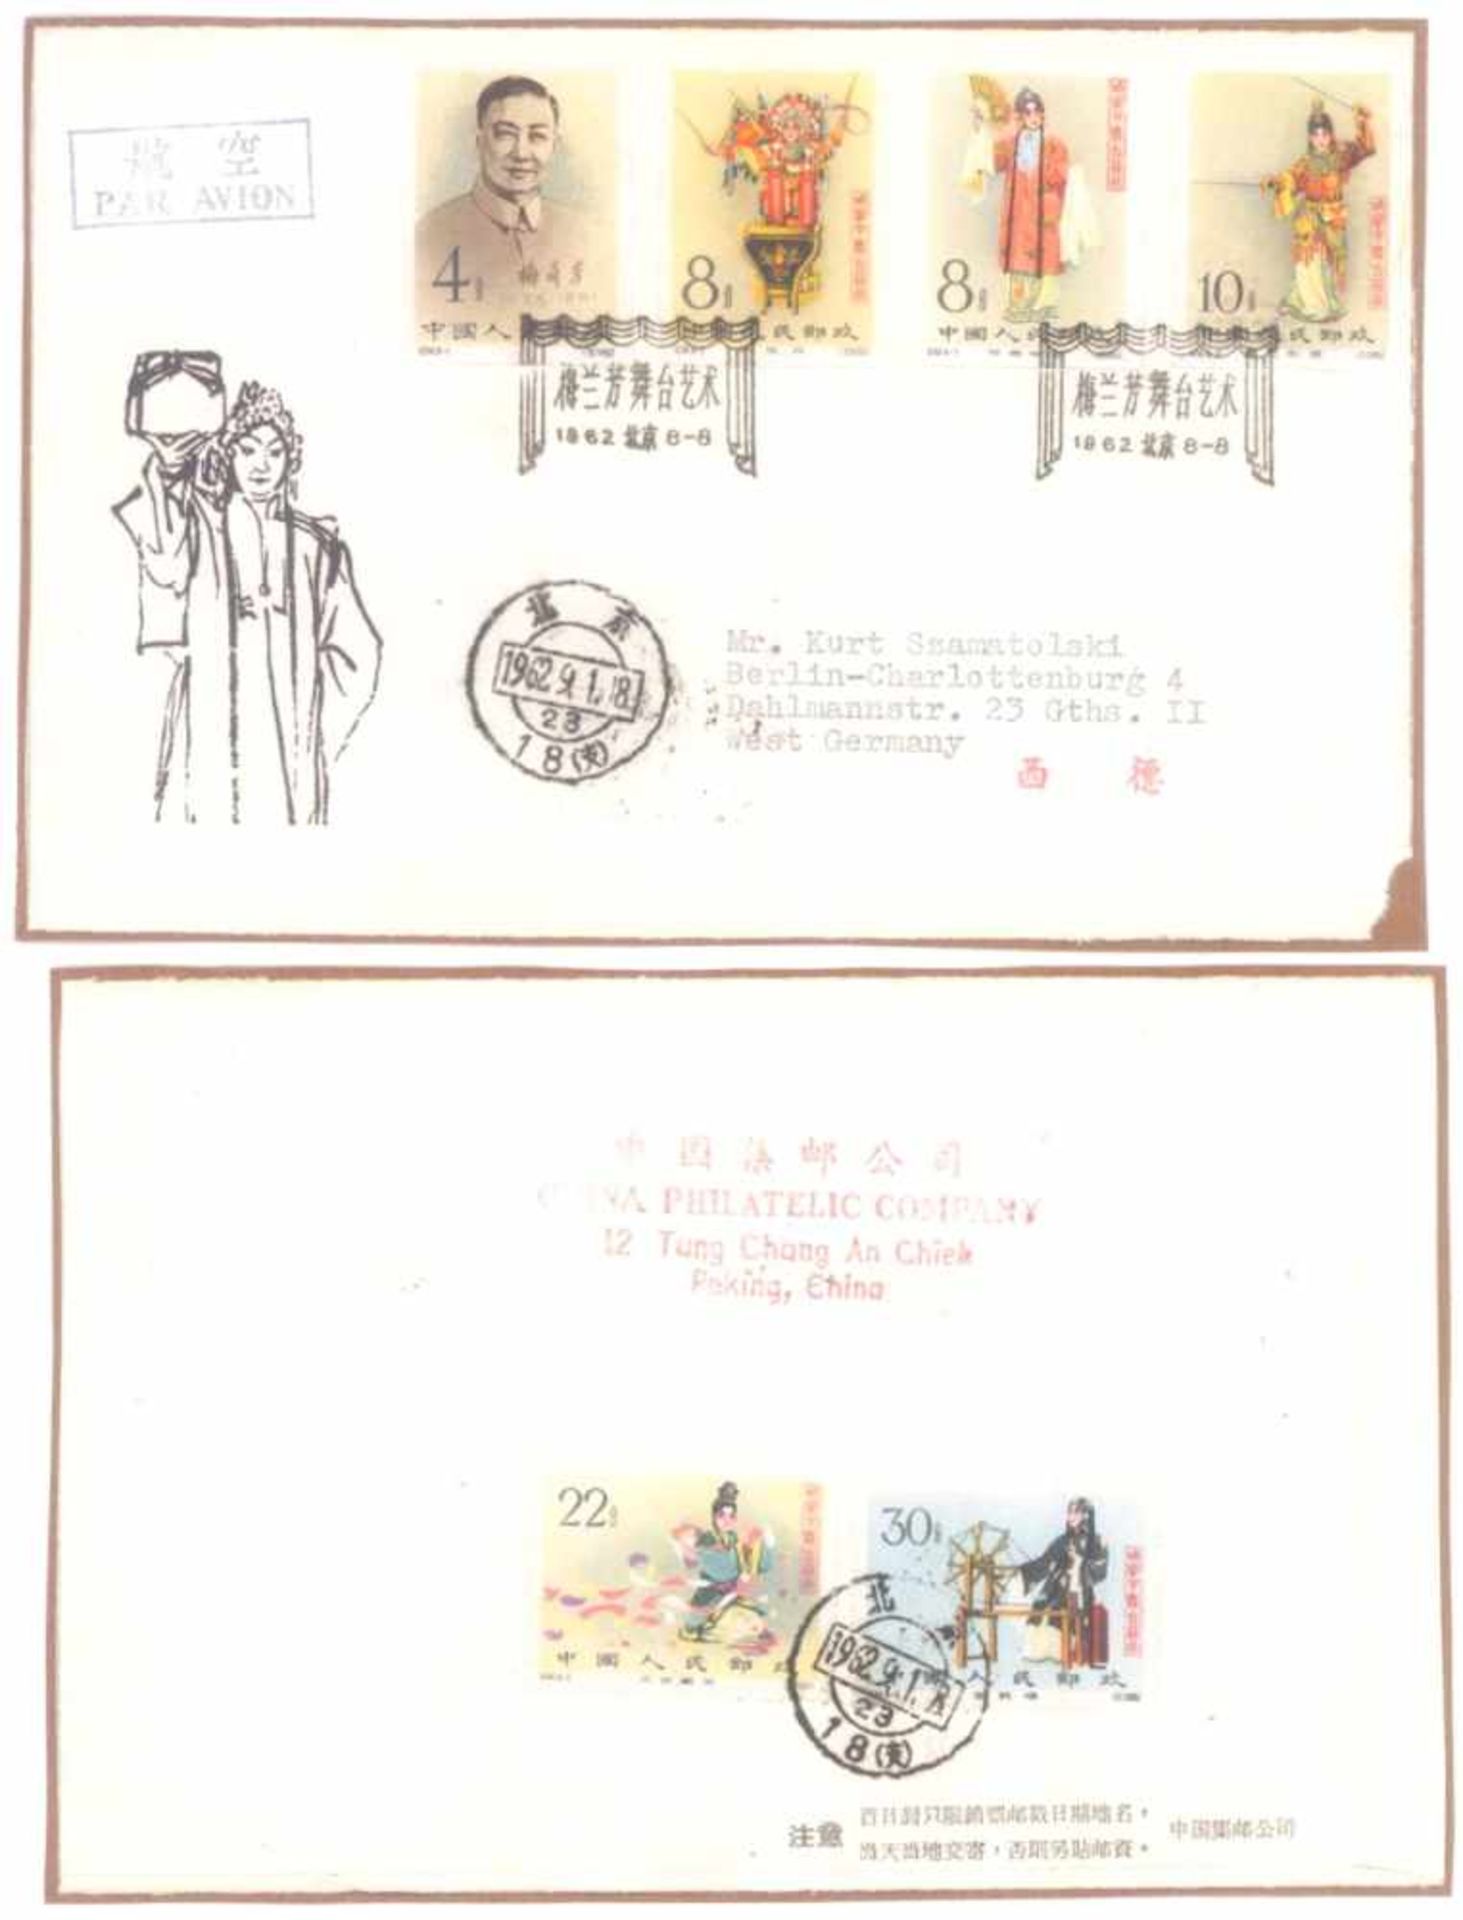 FDC, 648-651 B, People's Republic of China, Mei Langfang1 of 2 Airmail covers. FDC with the first